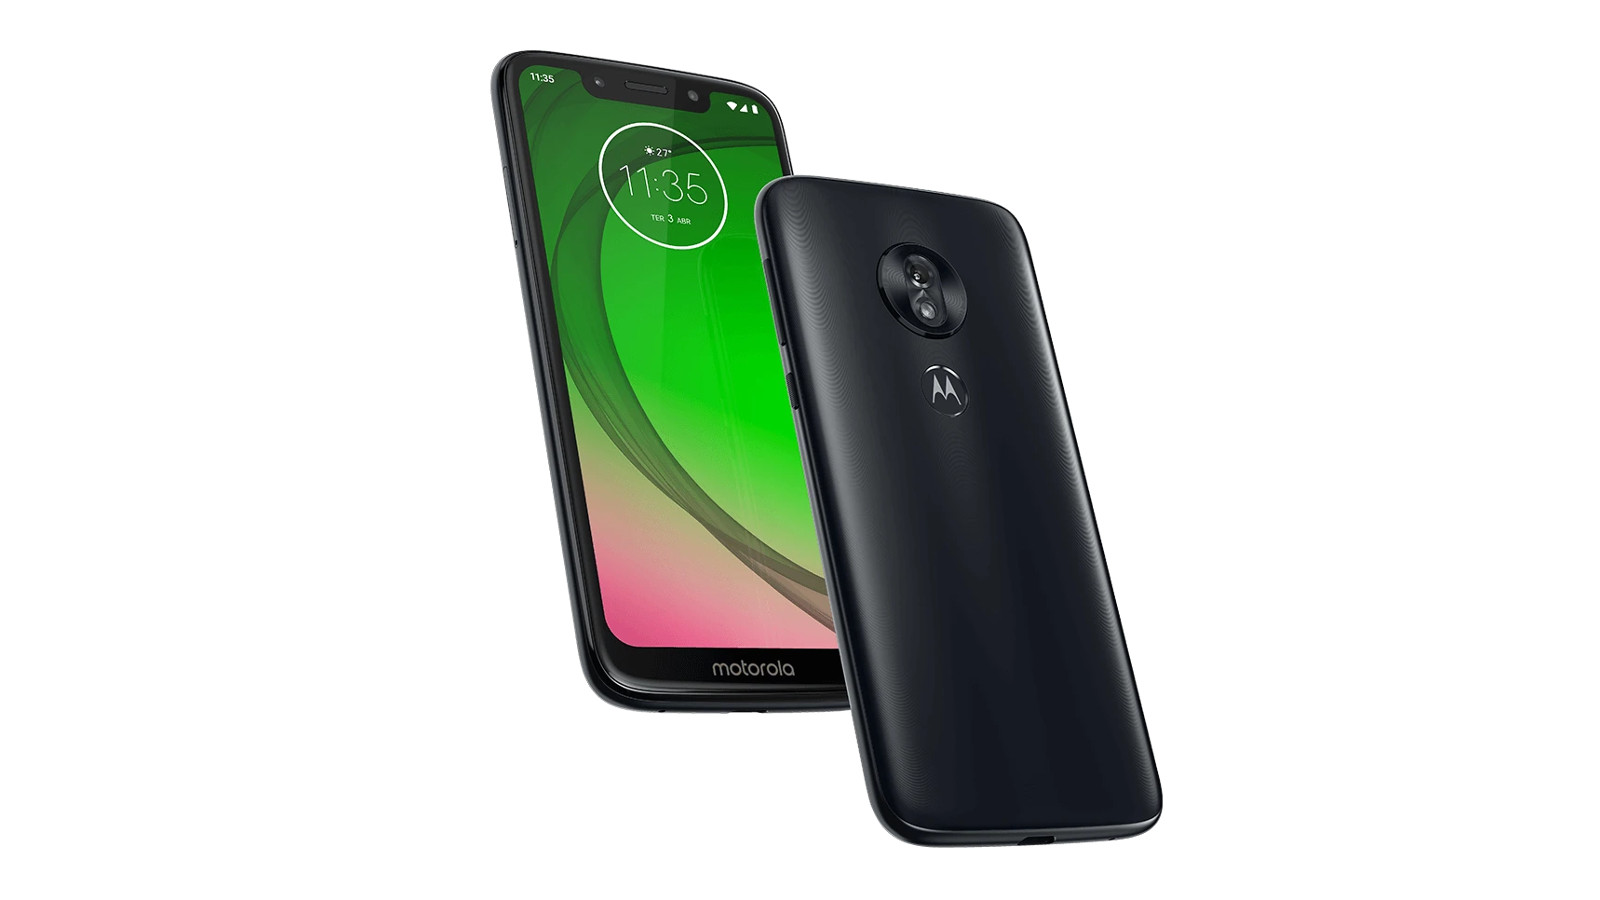 A render purportedly showing the Moto G7 Power.